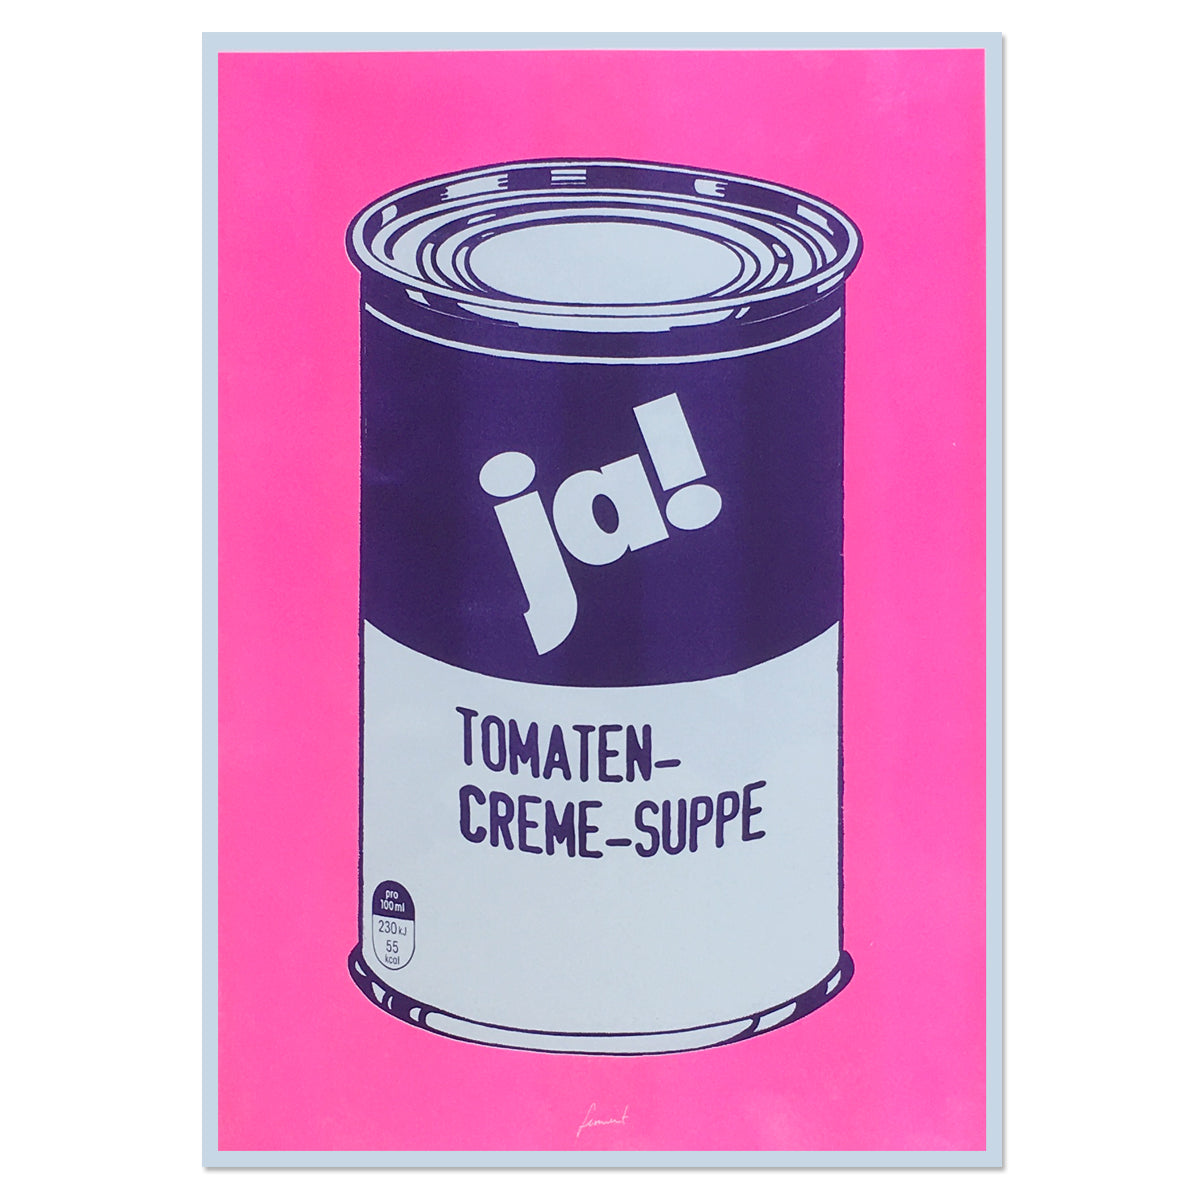 Risographie Tomaten-Creme-Suppe in Pink/Lila